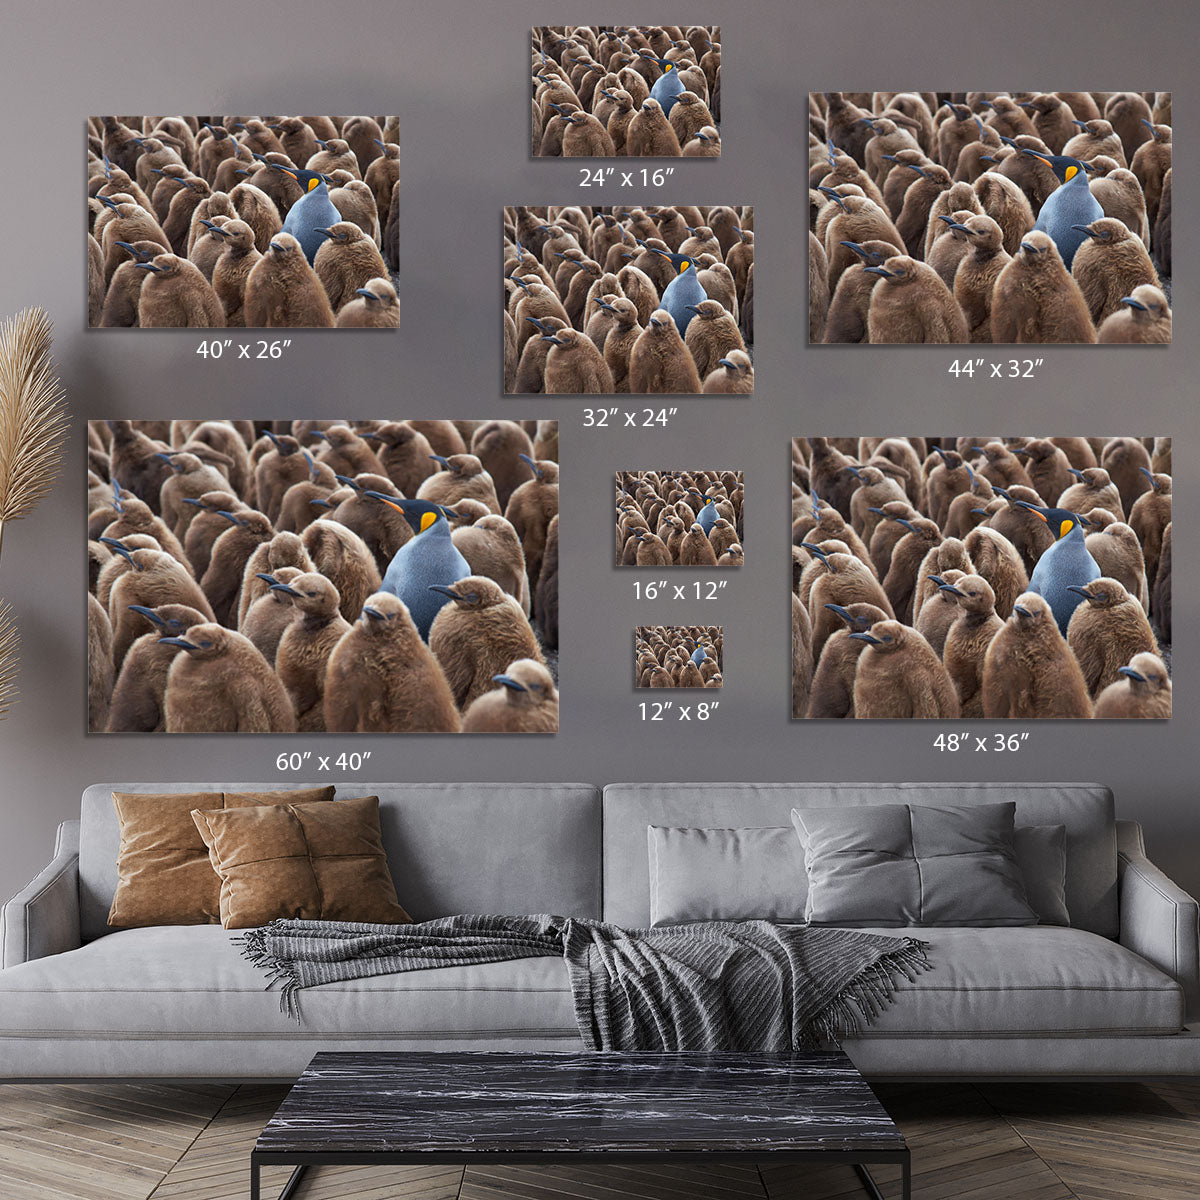 Adult King Penguin Aptenodytes patagonicus standing amongst a large group Canvas Print or Poster - Canvas Art Rocks - 7